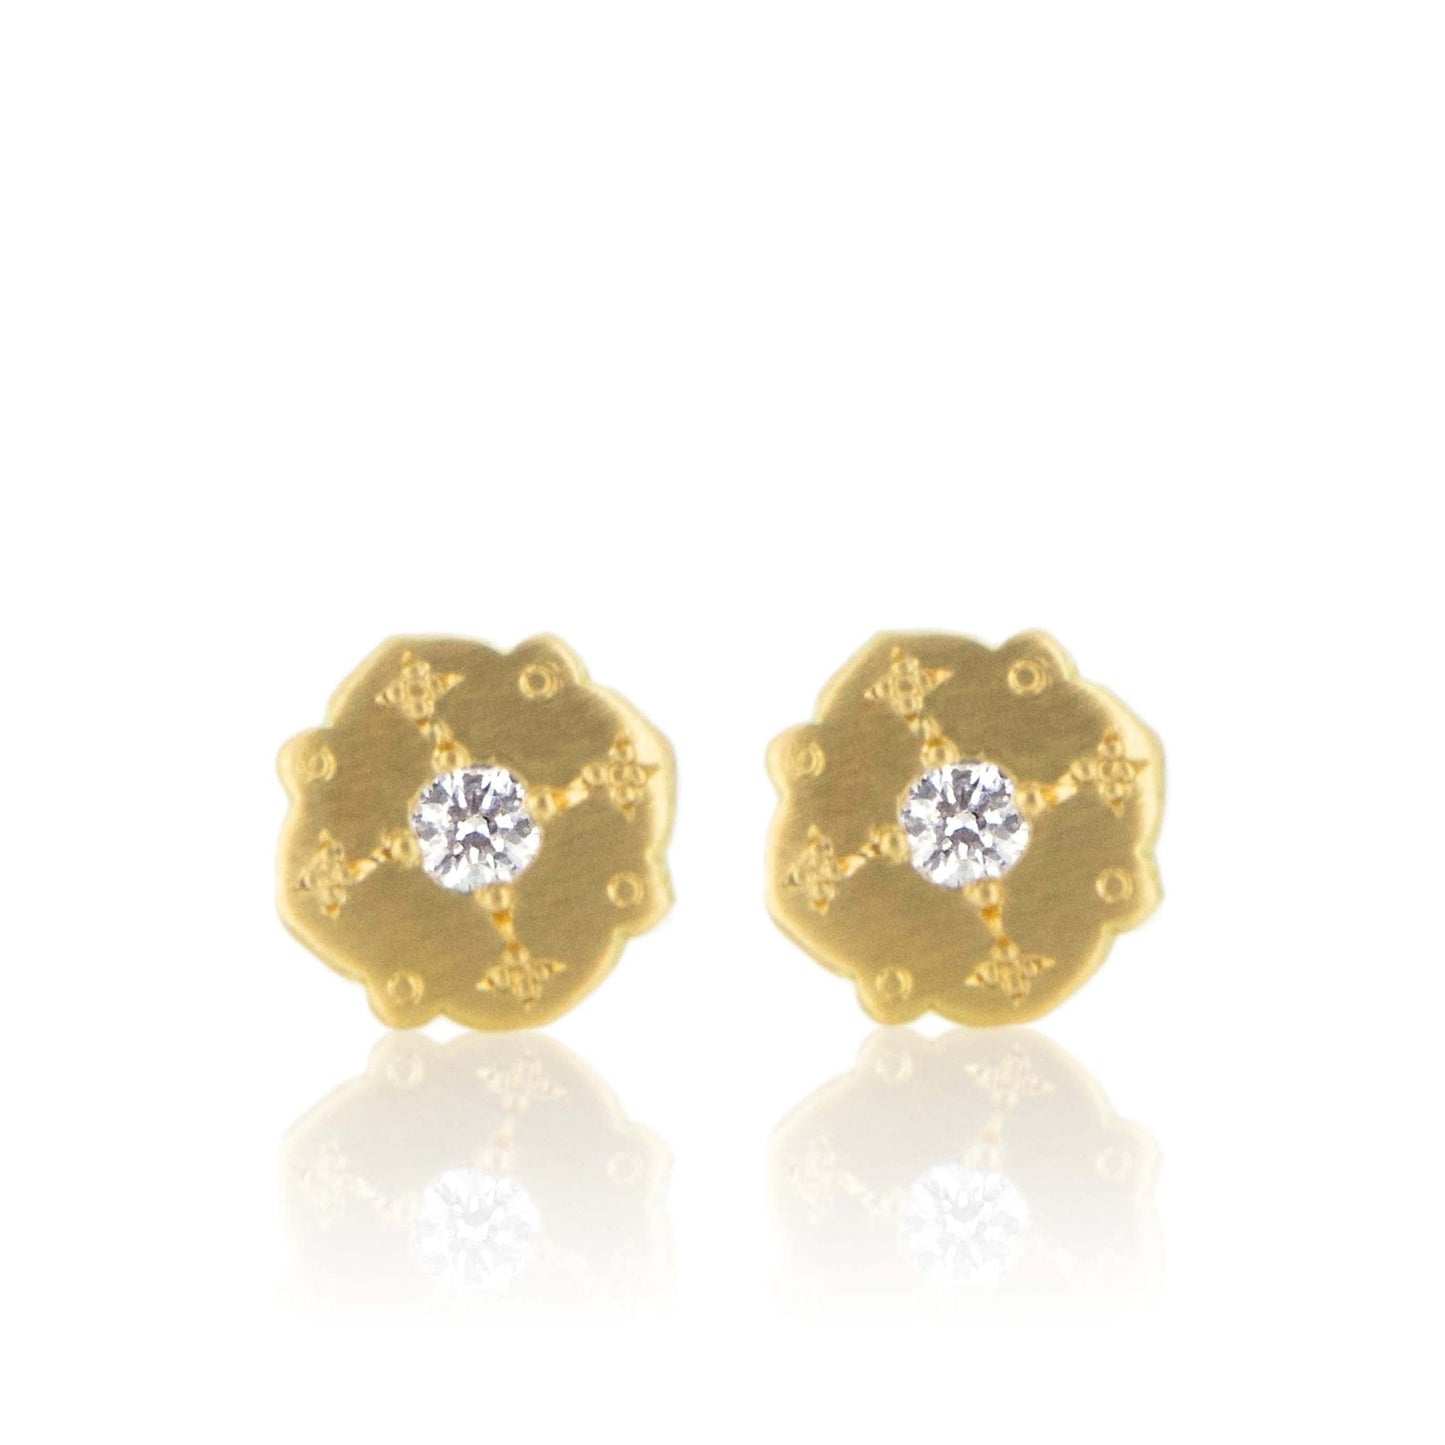 EAR-18K Drops of Happiness Kite Studs